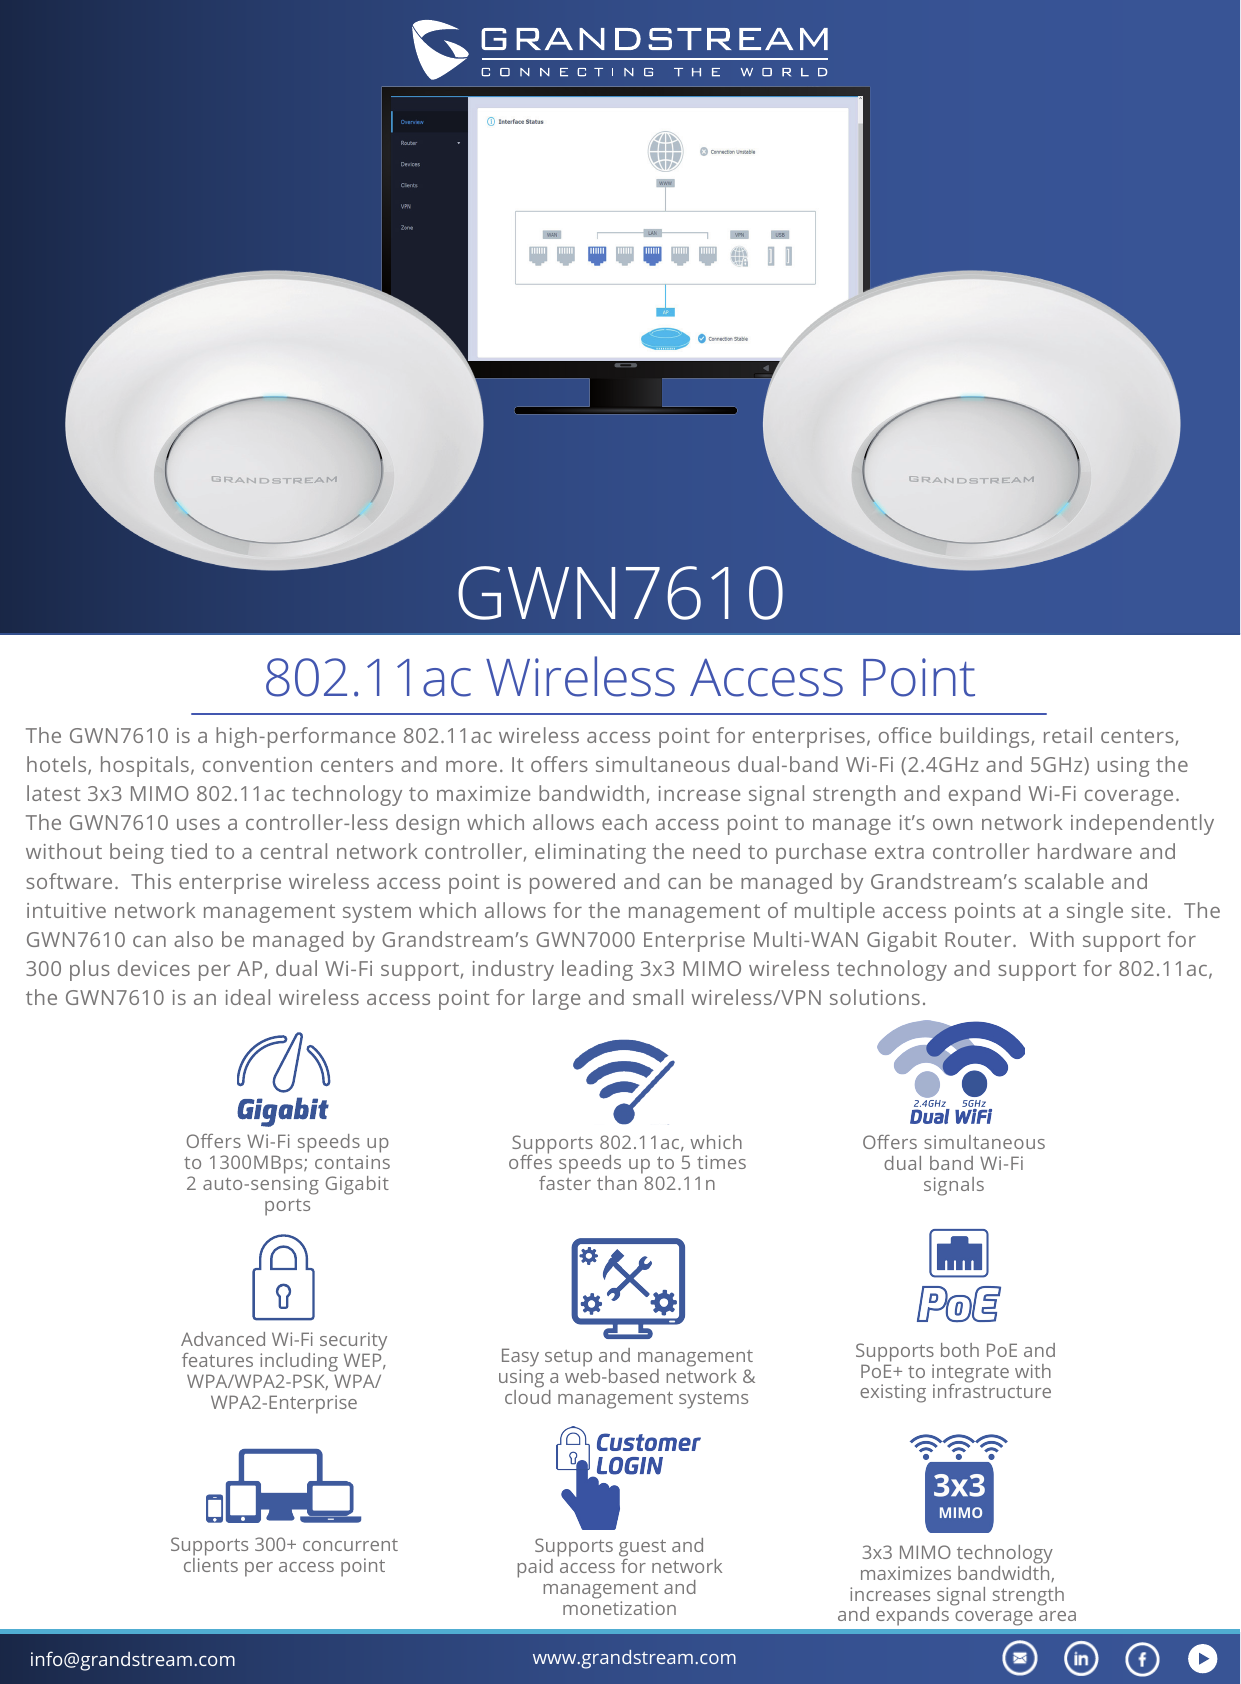 info@grandstream.com www.grandstream.comGWN7610802.11ac Wireless Access PointThe GWN7610 is a high-performance 802.11ac wireless access point for enterprises, oce buildings, retail centers, hotels, hospitals, convention centers and more. It oers simultaneous dual-band Wi-Fi (2.4GHz and 5GHz) using the latest 3x3 MIMO 802.11ac technology to maximize bandwidth, increase signal strength and expand Wi-Fi coverage. The GWN7610 uses a controller-less design which allows each access point to manage it’s own network independently without being tied to a central network controller, eliminating the need to purchase extra controller hardware and software.  This enterprise wireless access point is powered and can be managed by Grandstream’s scalable and intuitive network management system which allows for the management of multiple access points at a single site.  The GWN7610 can also be managed by Grandstream’s GWN7000 Enterprise Multi-WAN Gigabit Router.  With support for 300 plus devices per AP, dual Wi-Fi support, industry leading 3x3 MIMO wireless technology and support for 802.11ac, the GWN7610 is an ideal wireless access point for large and small wireless/VPN solutions. Supports 802.11ac, which oes speeds up to 5 times faster than 802.11nOers Wi-Fi speeds up to 1300MBps; contains 2 auto-sensing Gigabit portsSupports both PoE and PoE+ to integrate with existing infrastructureEasy setup and management using a web-based network &amp; cloud management systemsAdvanced Wi-Fi security features including WEP, WPA/WPA2-PSK, WPA/WPA2-Enterprise3x3 MIMO technology maximizes bandwidth, increases signal strength and expands coverage areaSupports 300+ concurrent clients per access pointSupports guest and paid access for network management and monetizationOers simultaneous dual band Wi-Fi signals